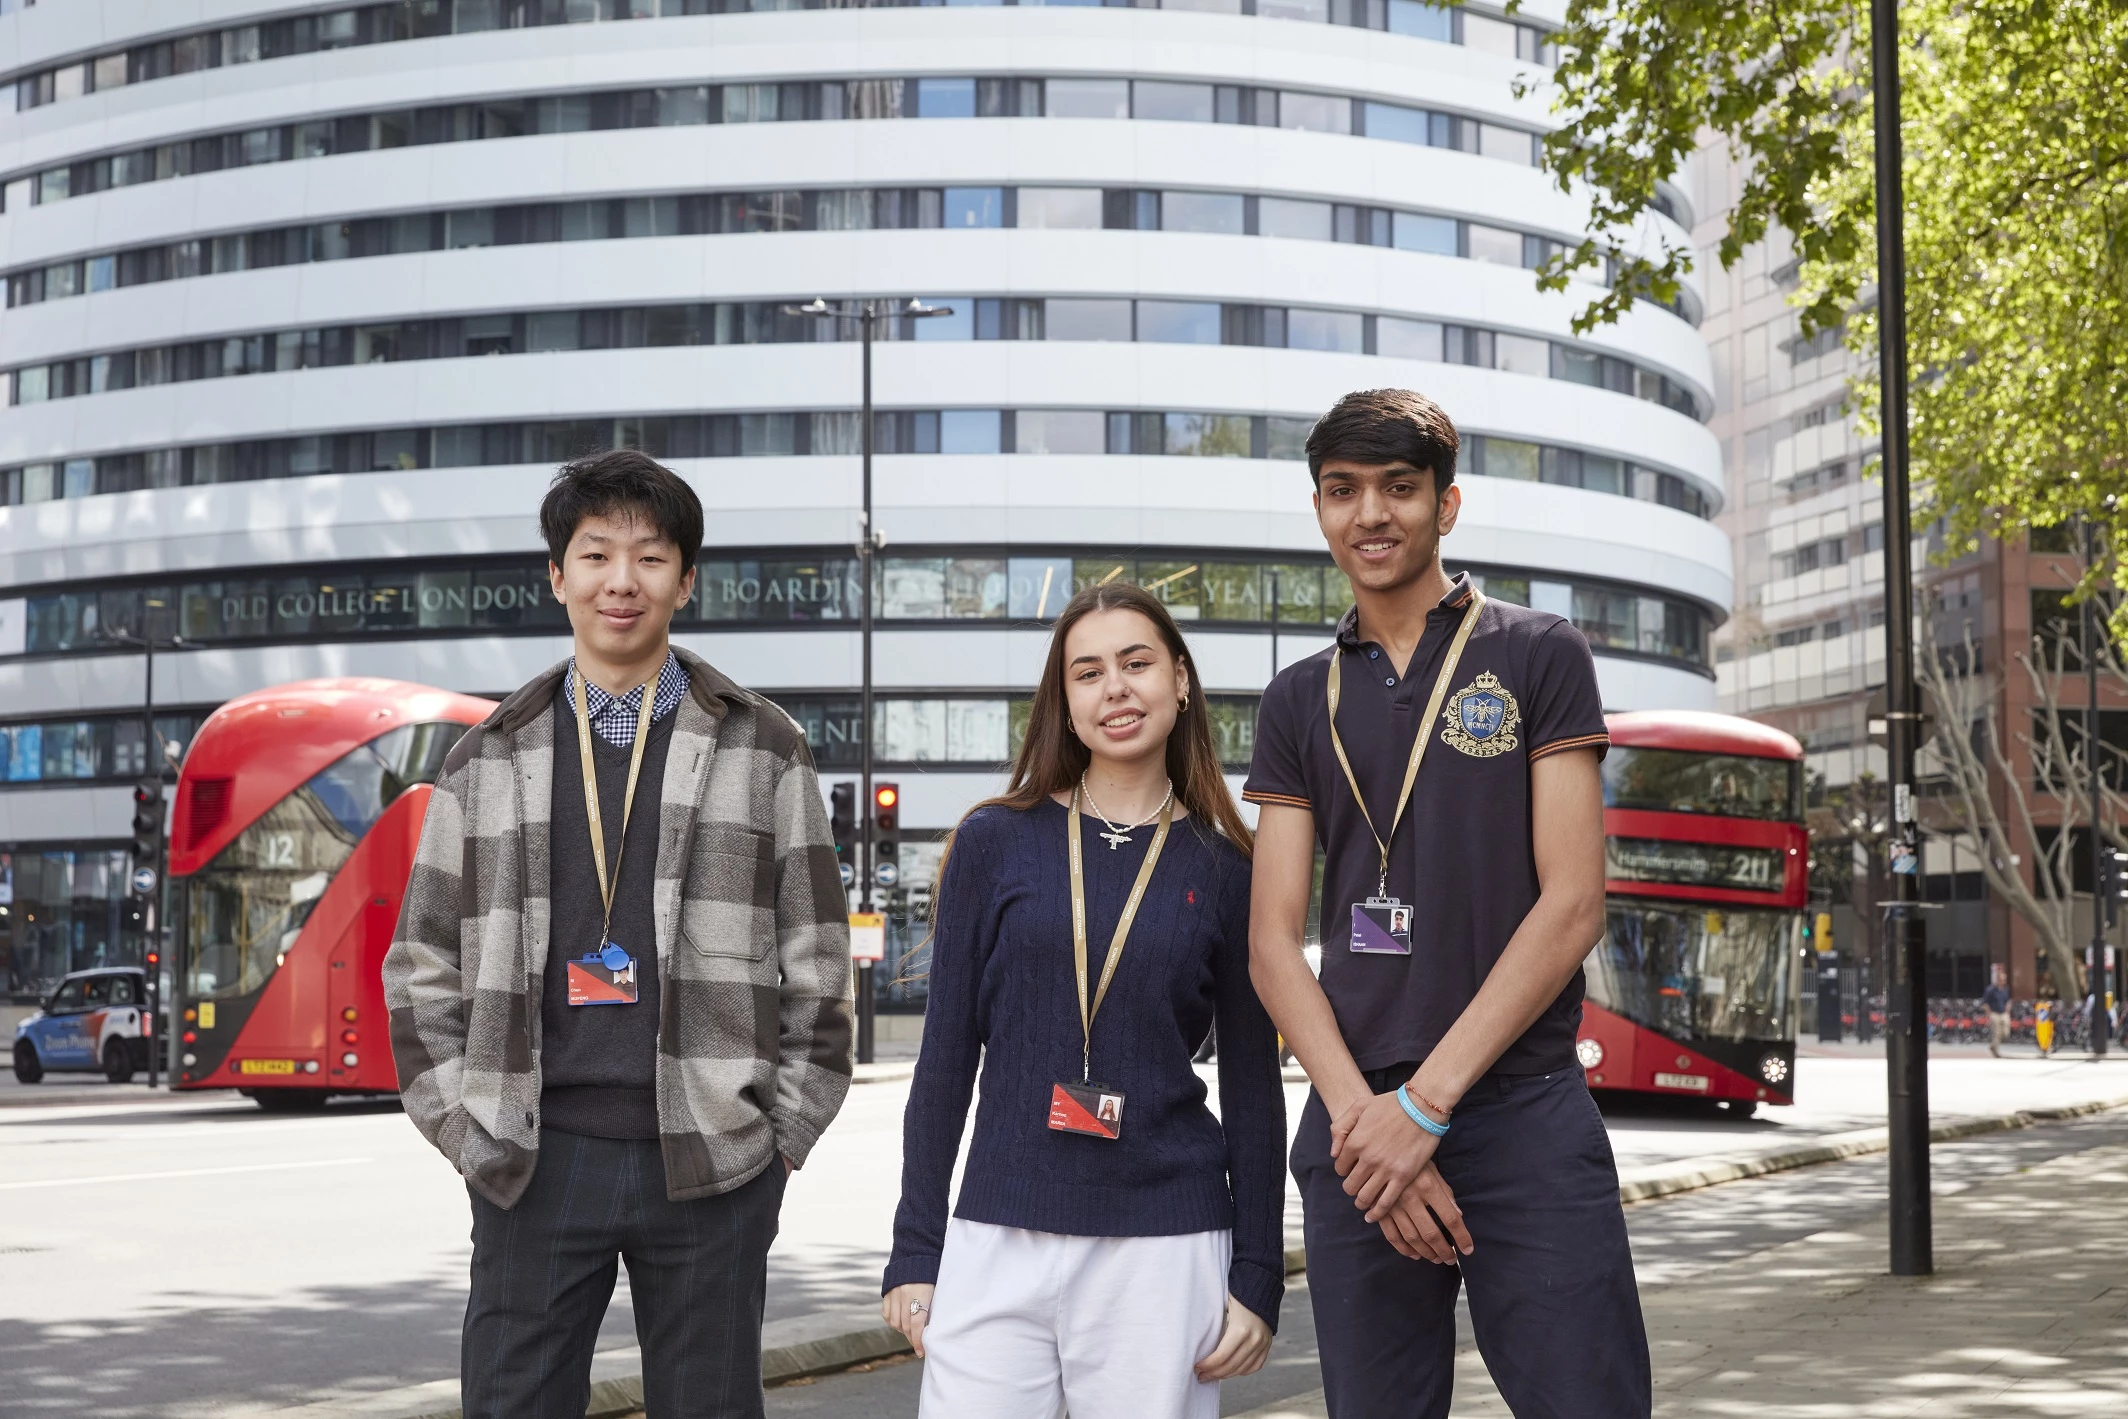 DLD students outside DLD College London